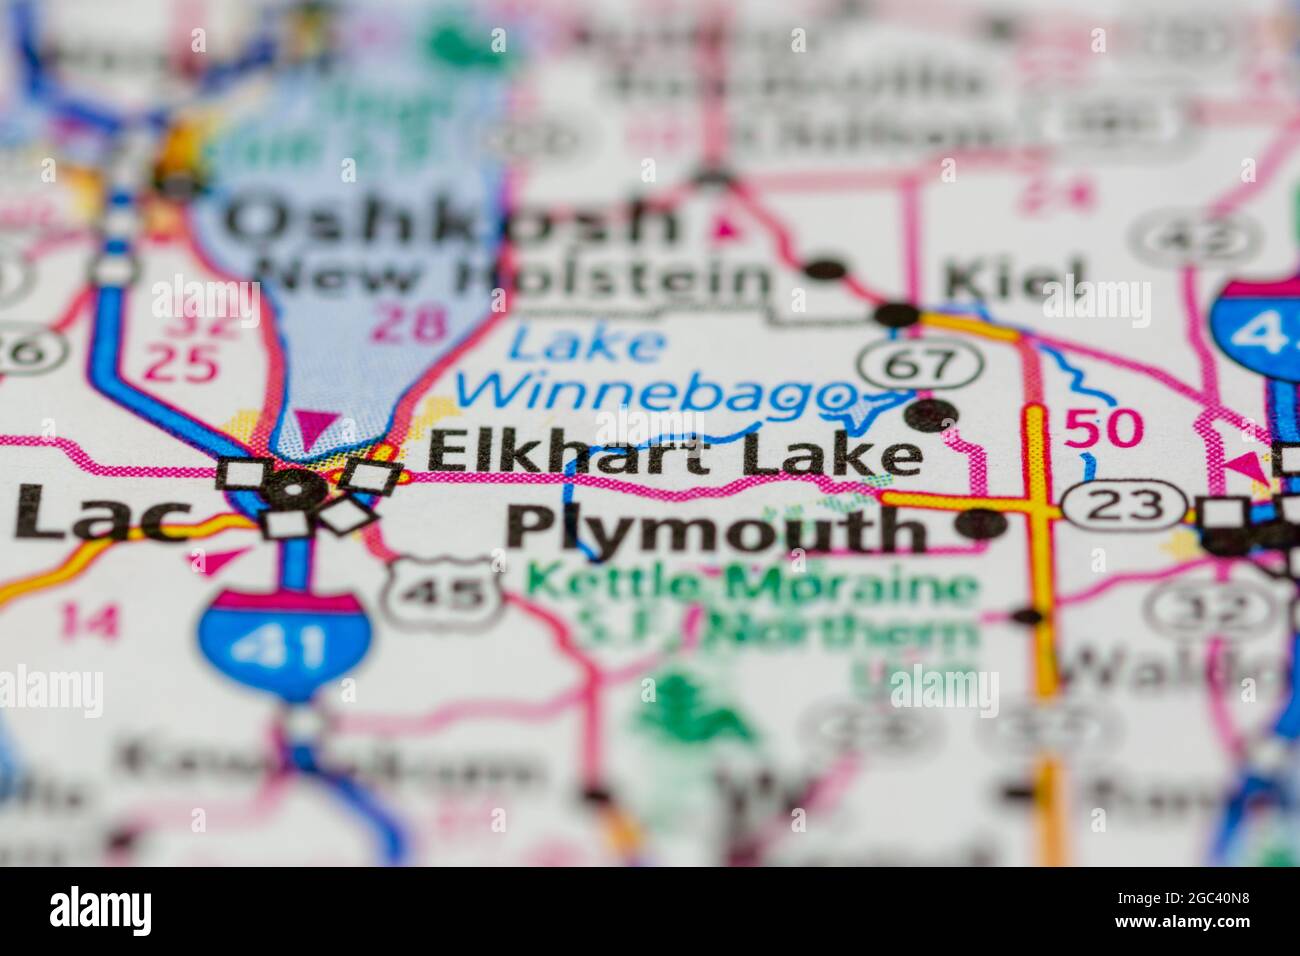 Elkhart Lake Wisconsin USA shown on a road map or Geography map Stock Photo